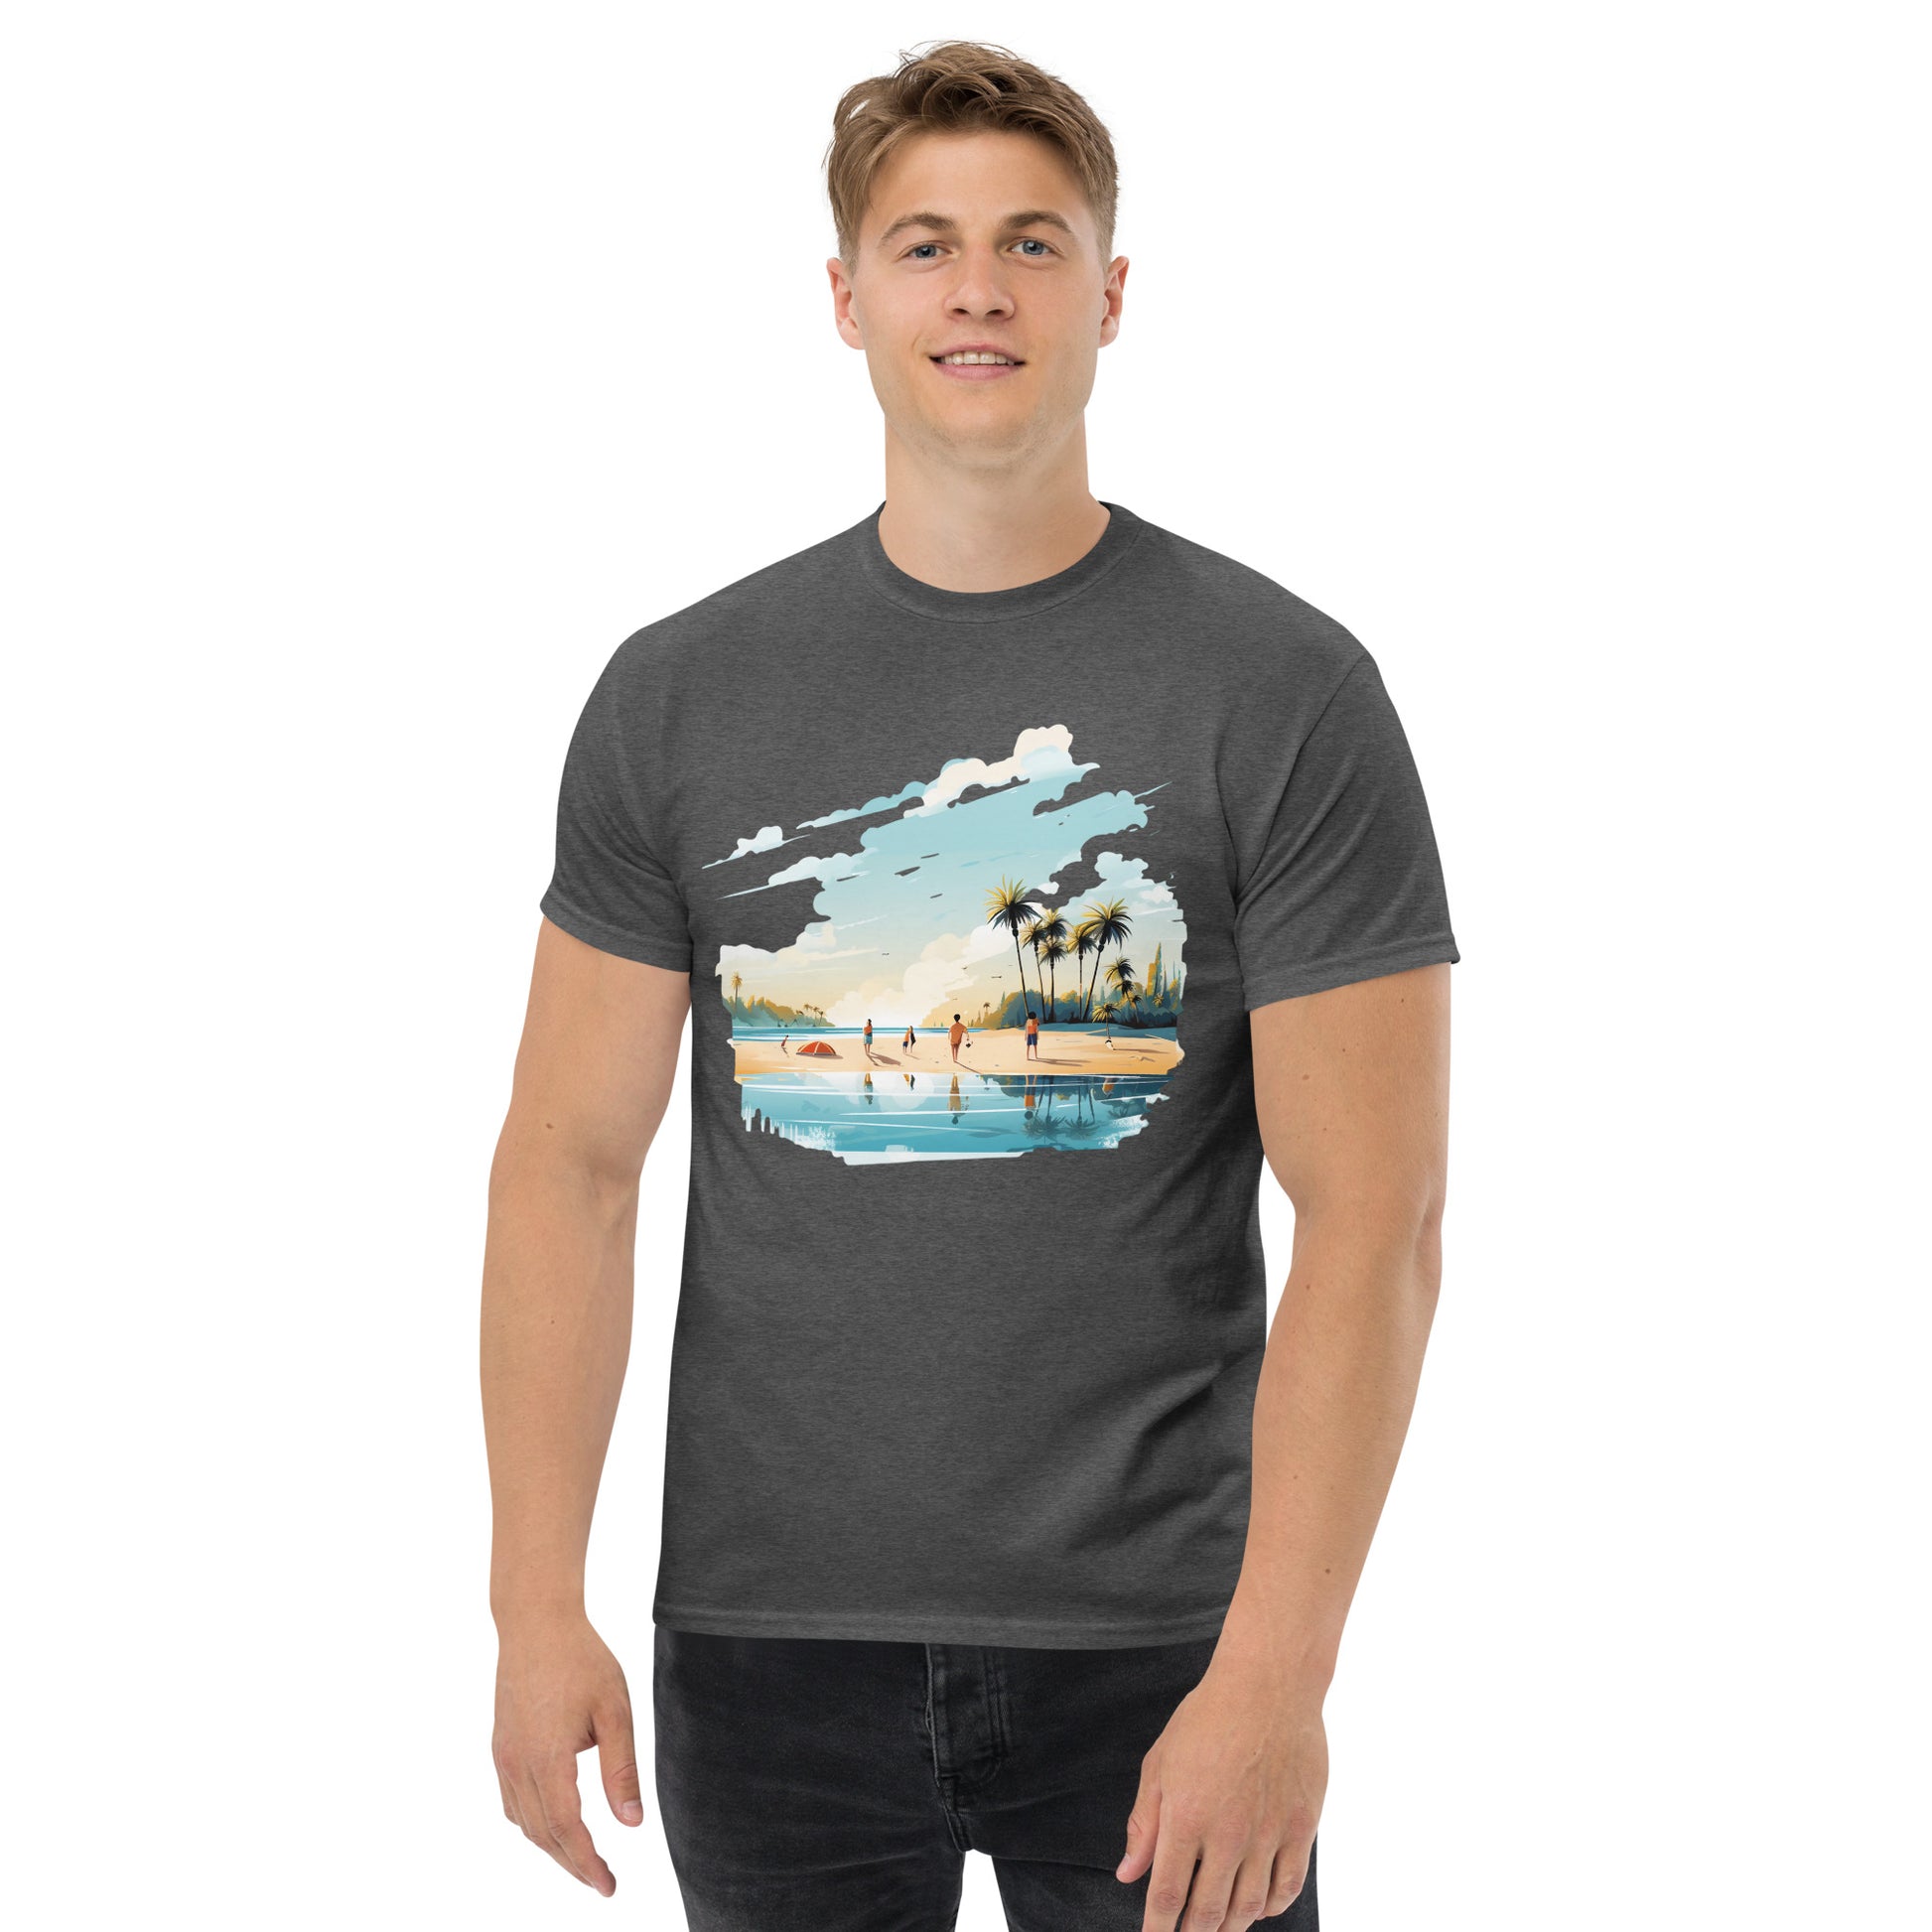 Men with dark heather T-shirt and a picture of a island with sea and sand